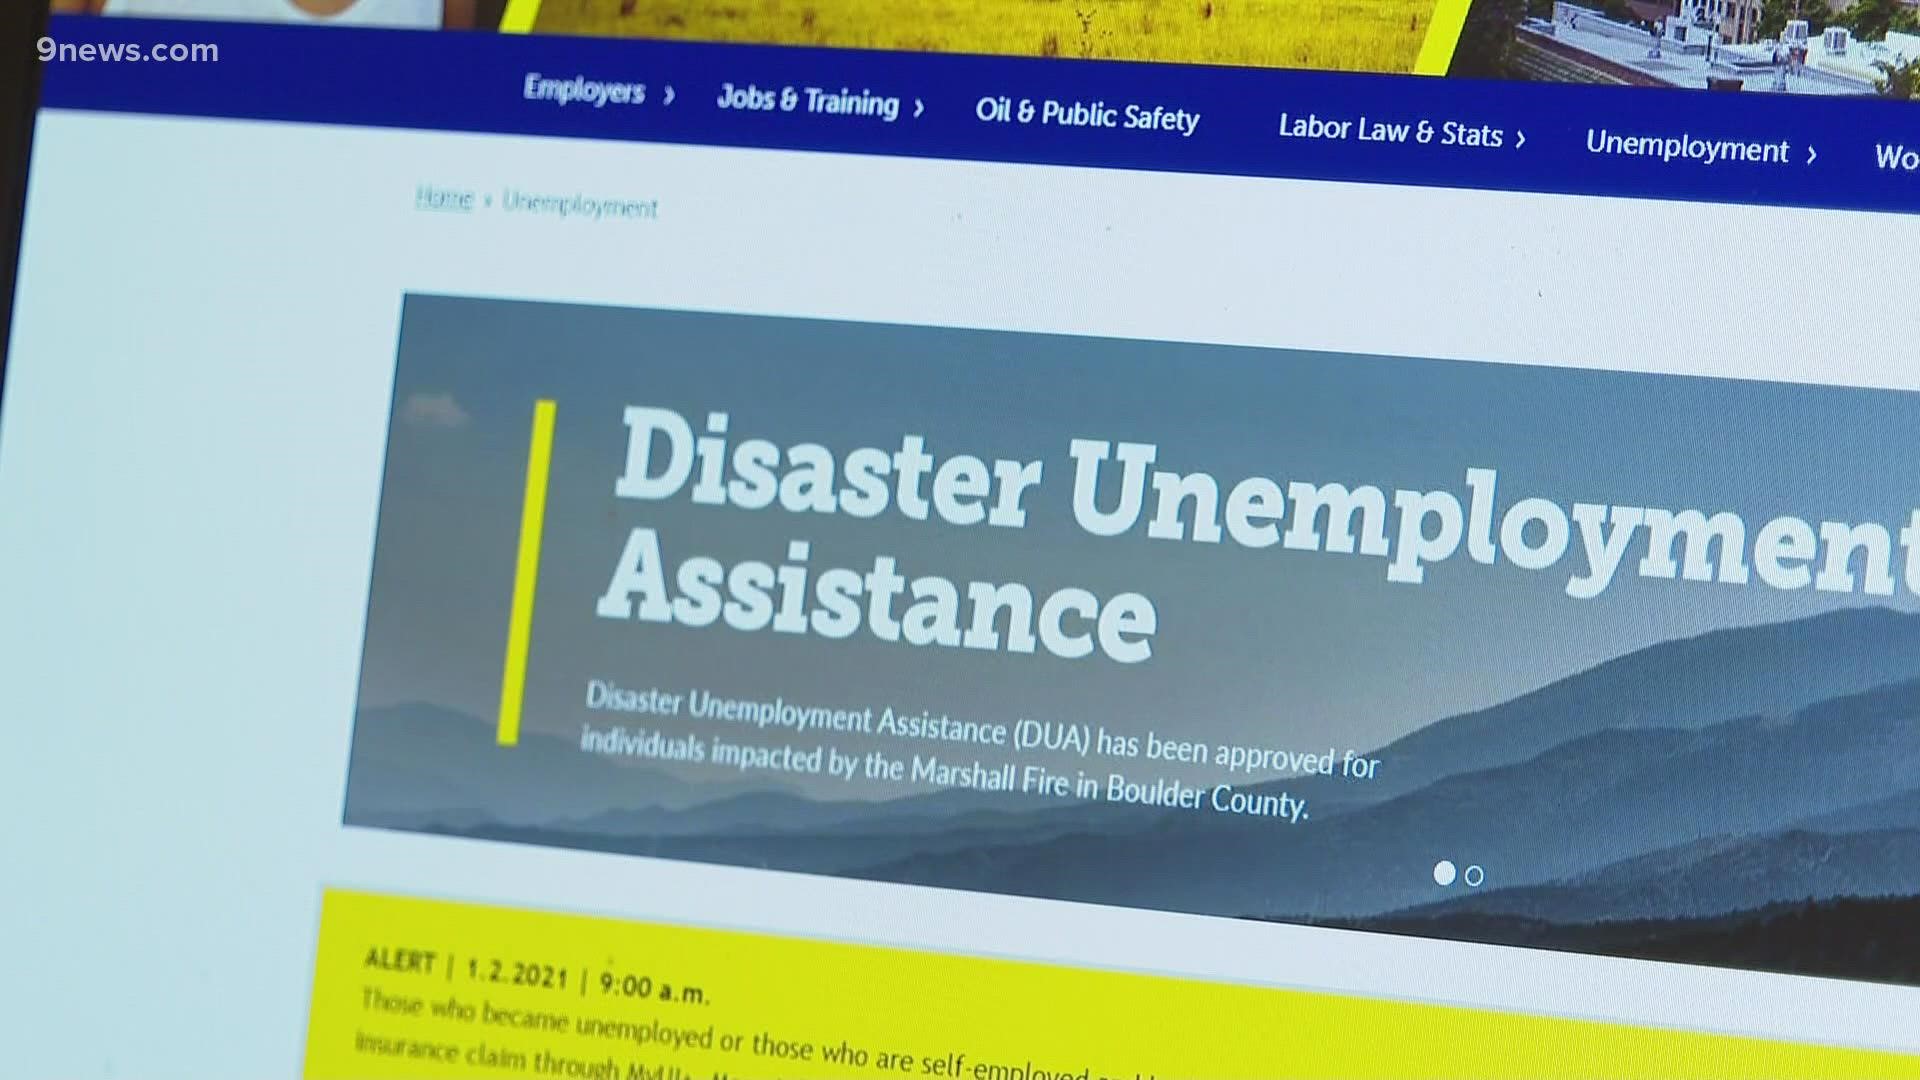 Colorado's labor department said victims can apply for up to 26 weeks of unemployment benefits, and they are also urged to file insurance claims as soon as possible.